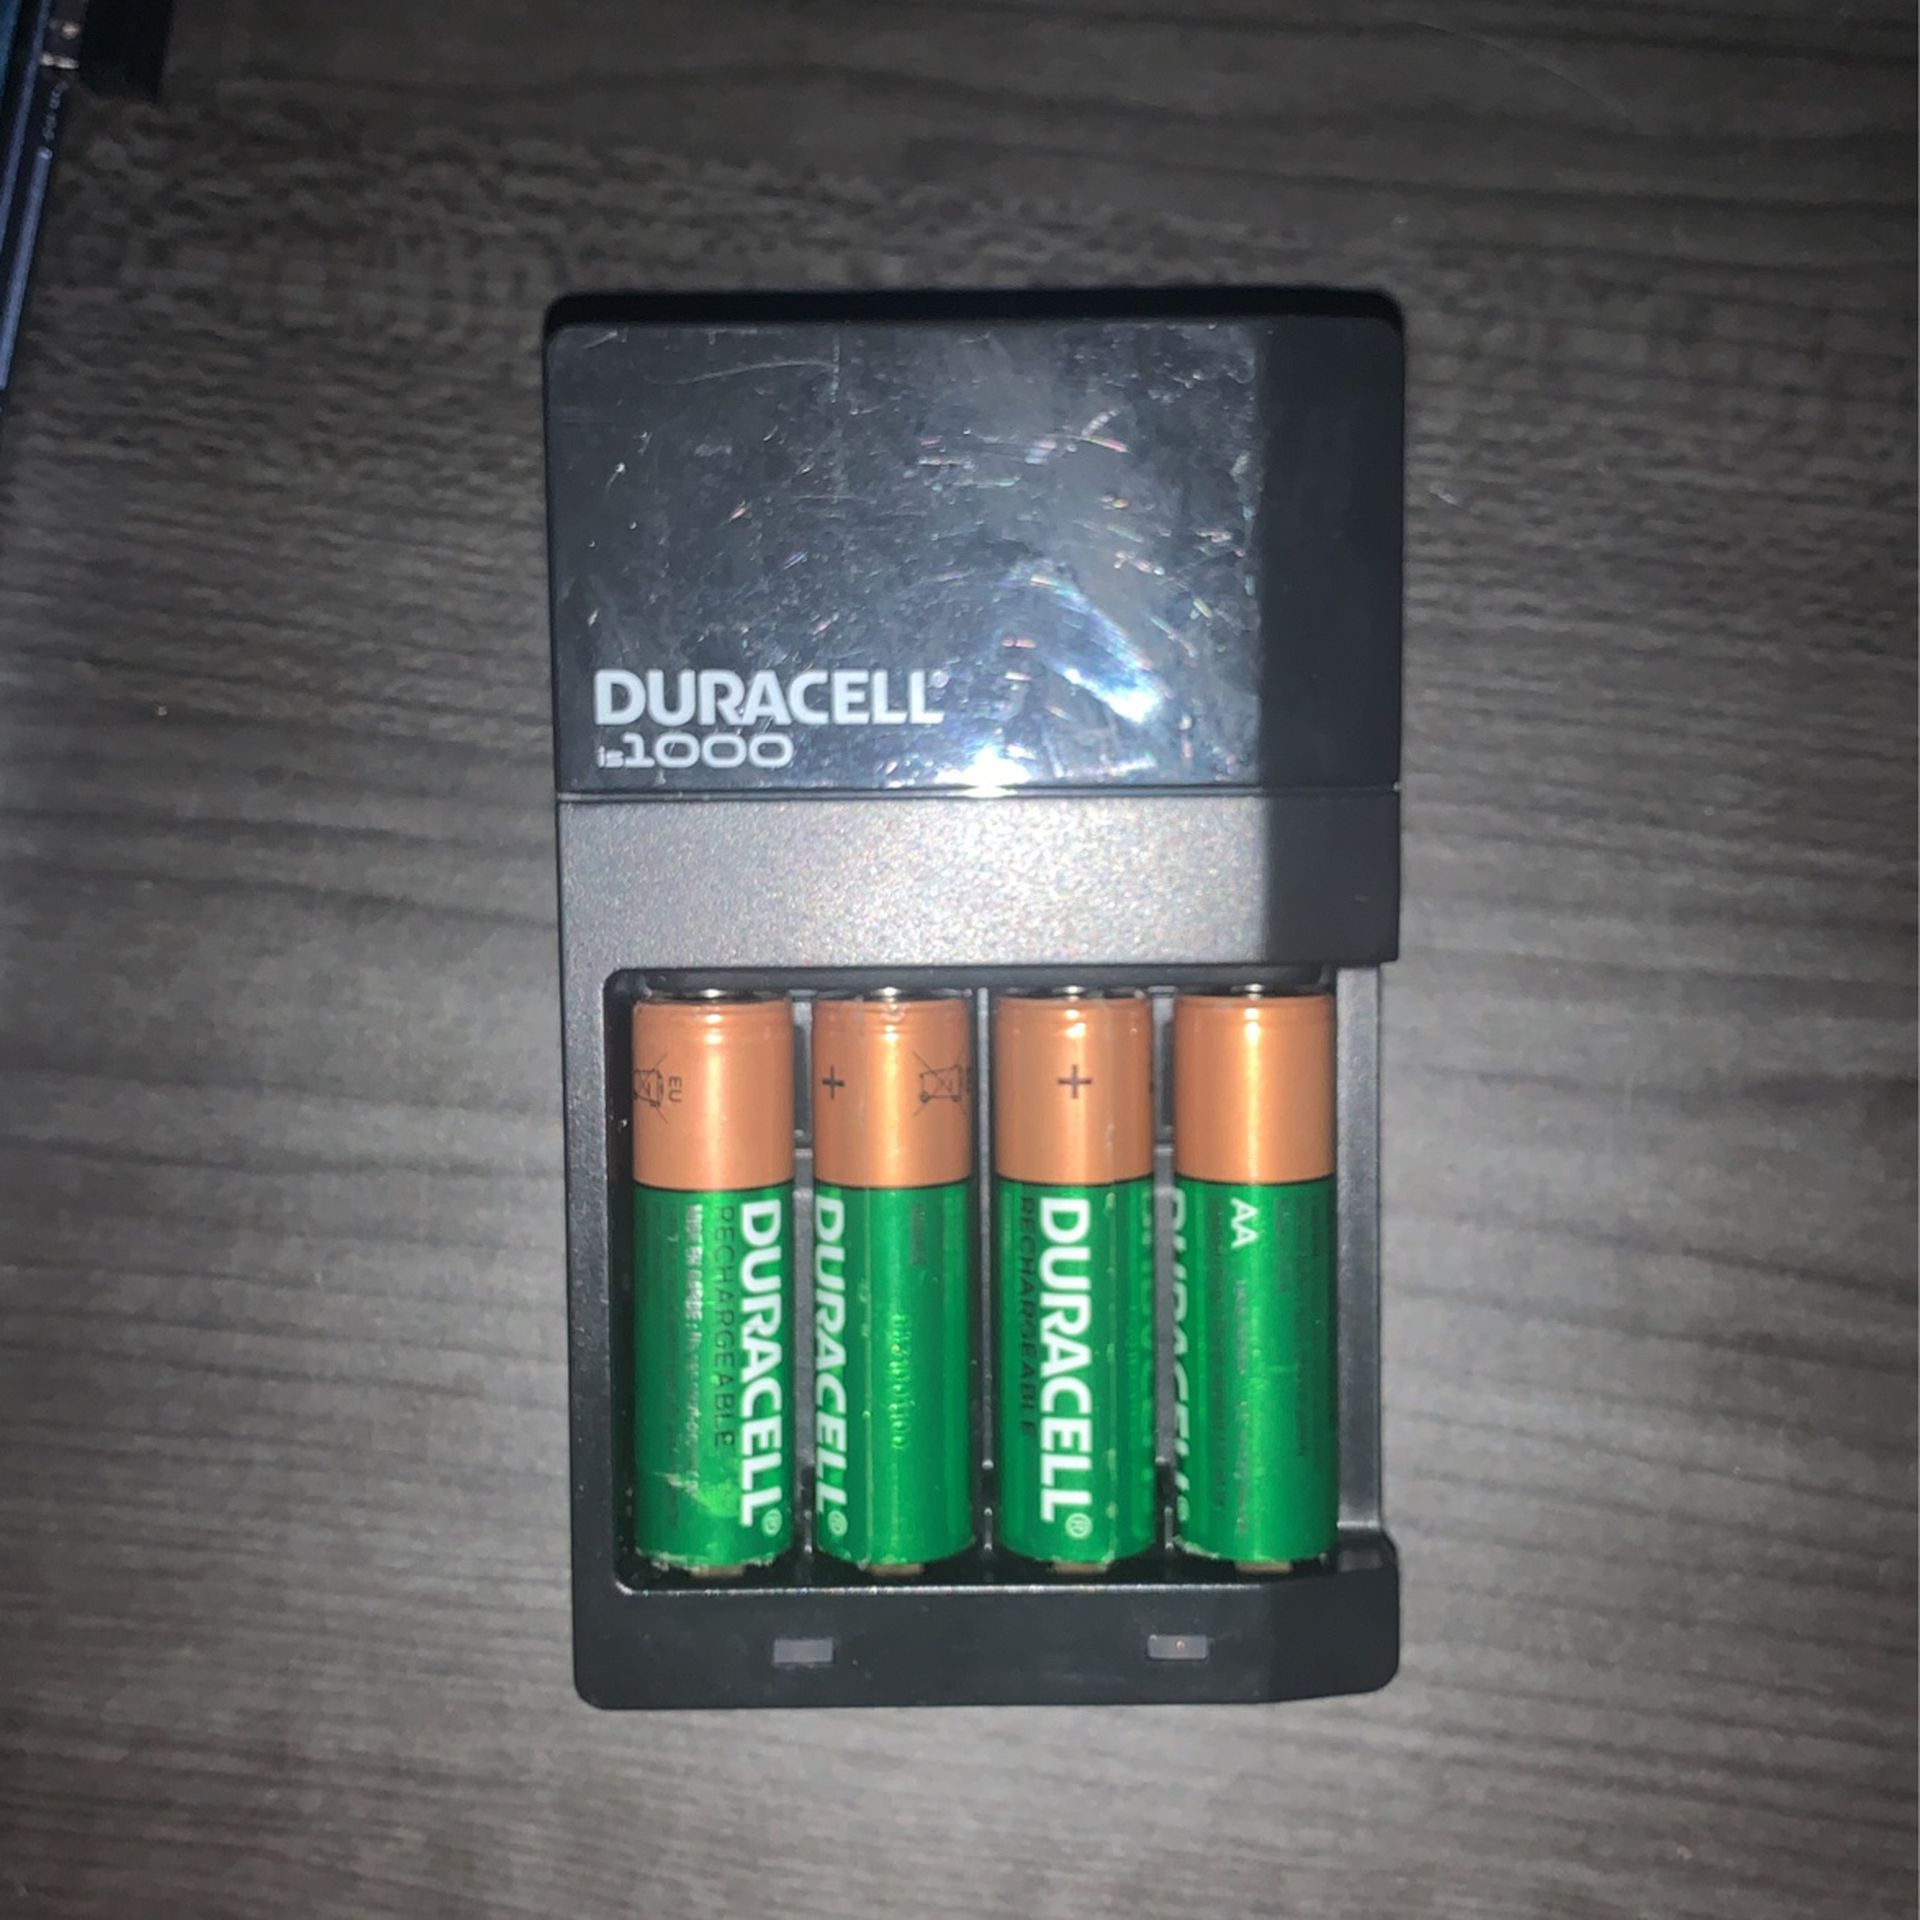 Duracell AA Rechargeable Battery’s